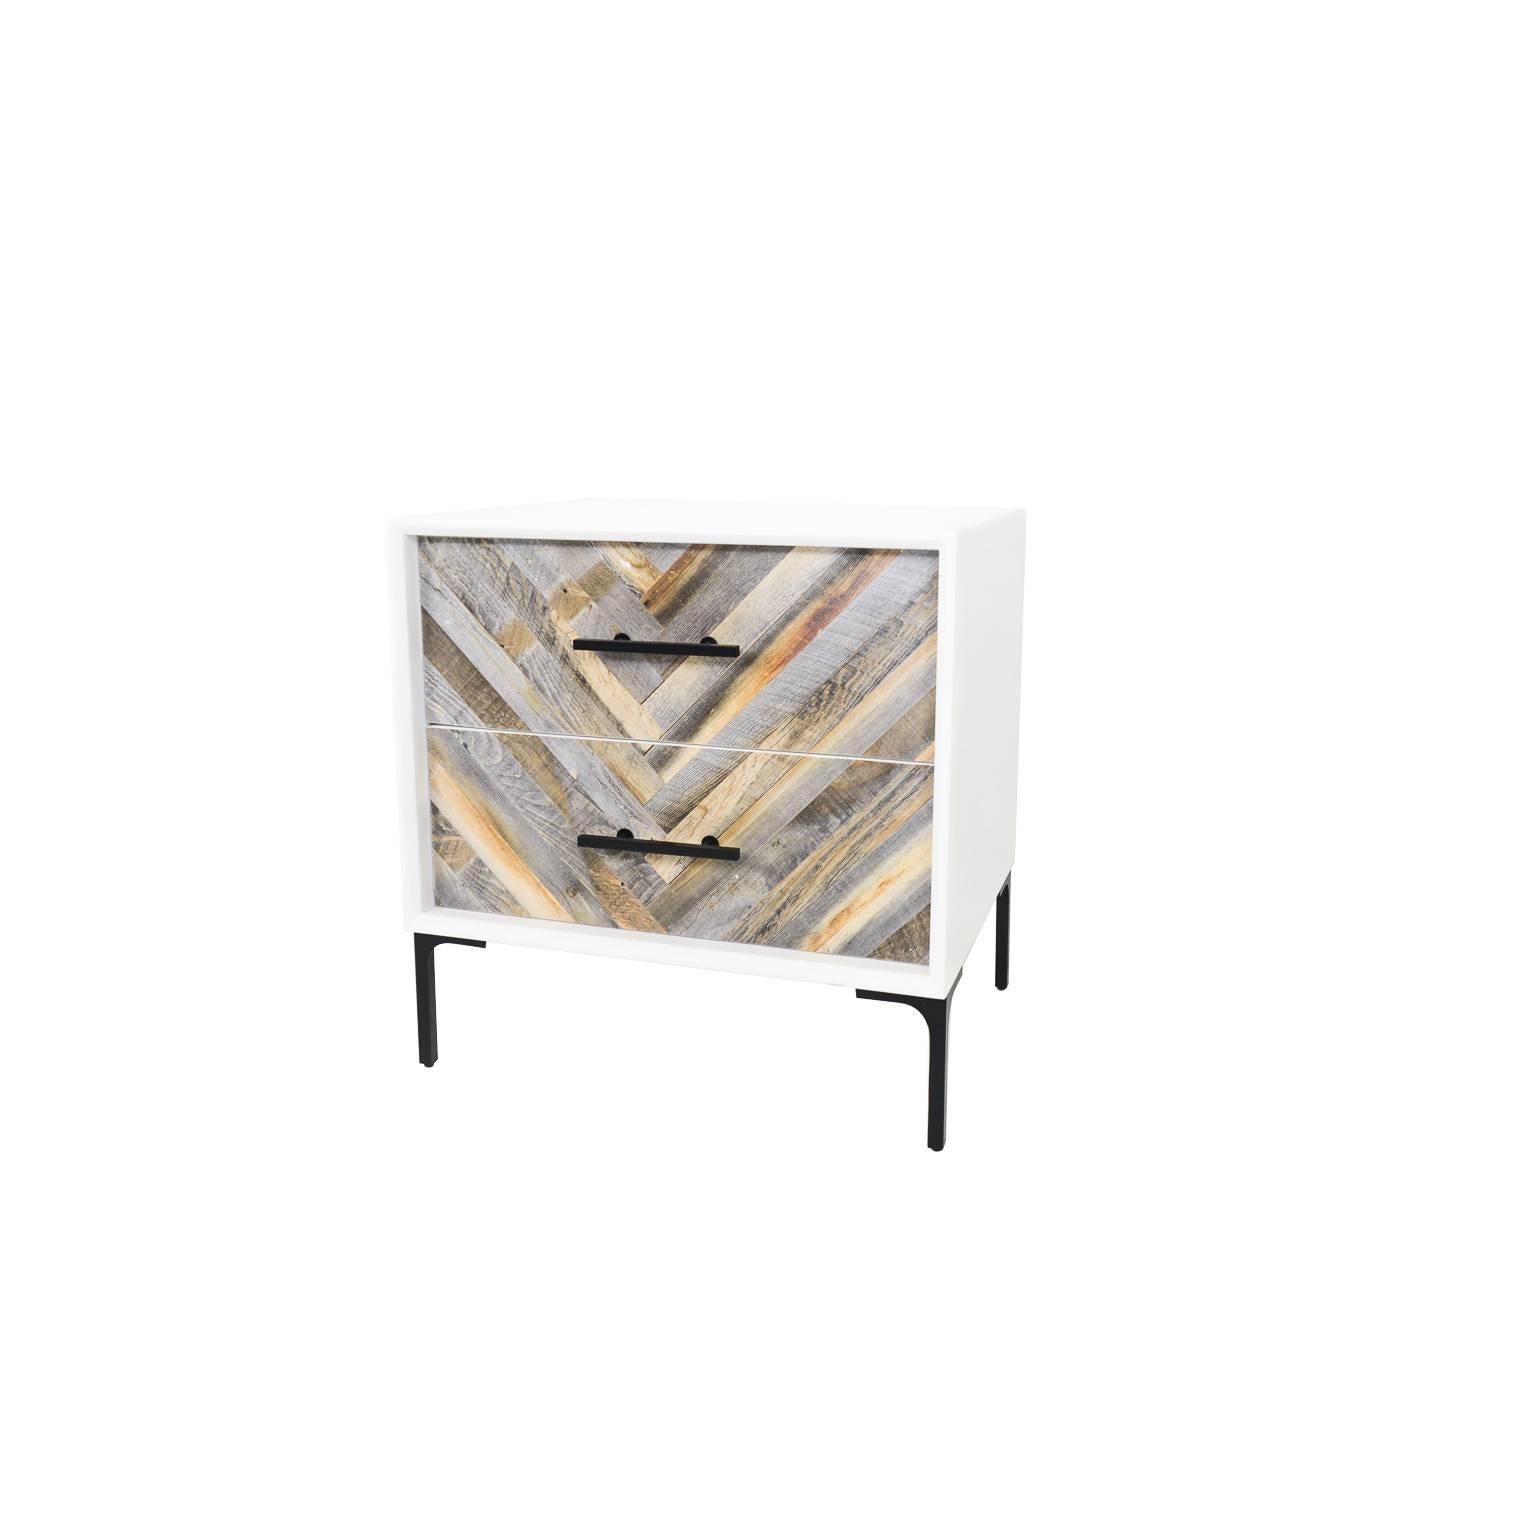 Two-drawer side table with recycled wood drawers. Matte white frame and black legs. 
This is a made to order piece, if additional pieces please contact us. 

Measures: 26